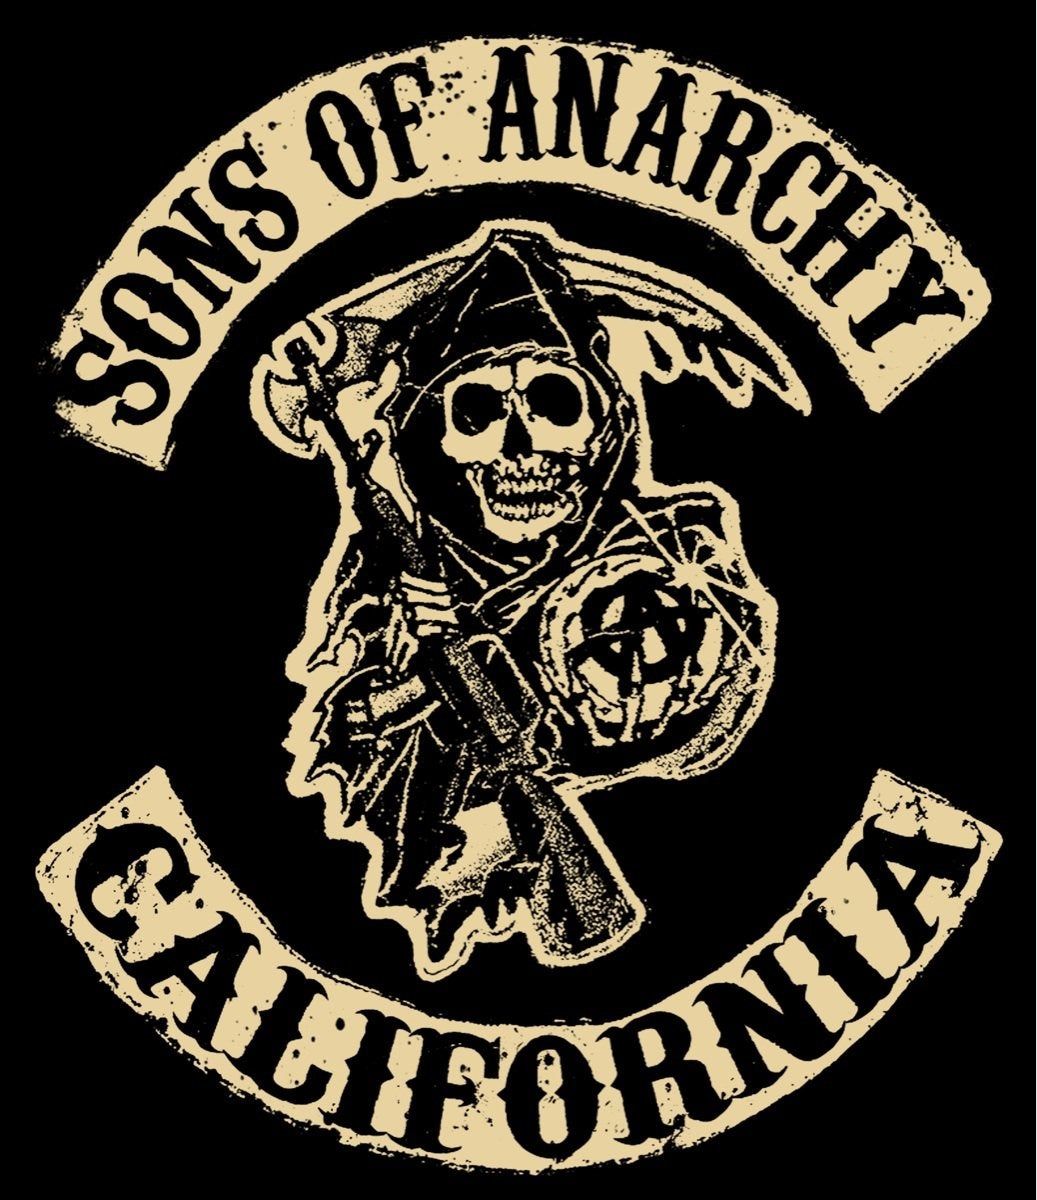 Sons of Anarchy Wallpaper! Post your best!: Sonsofanarchy